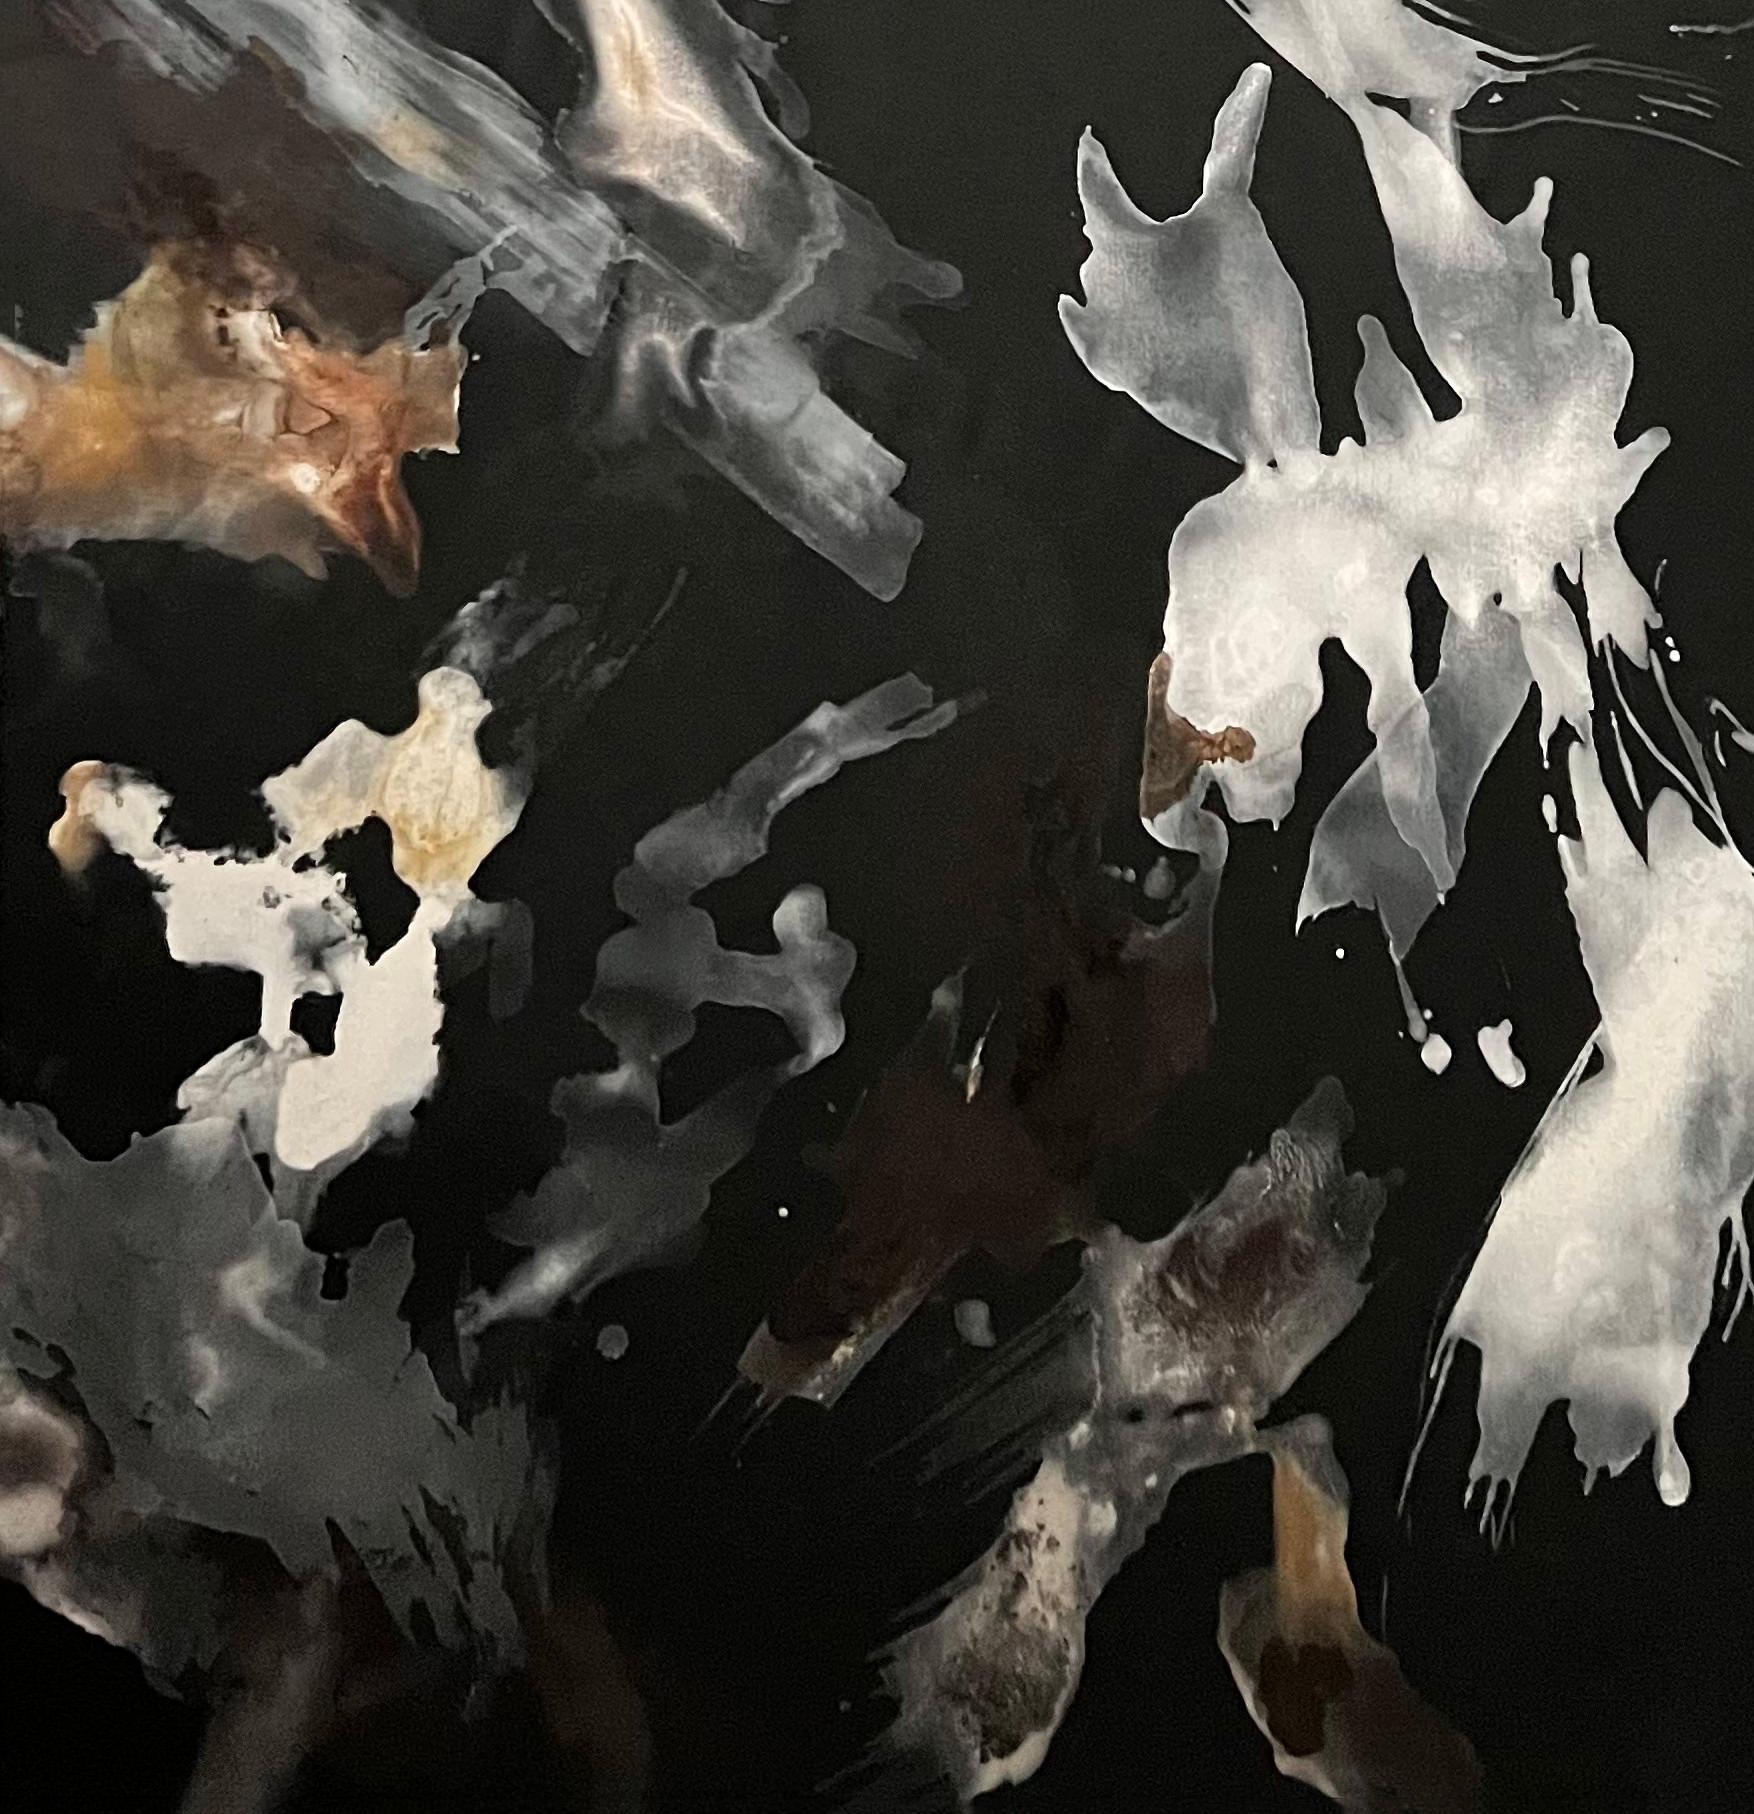 White Series n3, 2023 by Rosario Briones
From the White series 
Mixed media: natural pigments, Indian ink, watercolor on canvas.
Dimensions: 160 H x 100 W cm.
Unframed
Signed by the artist

In this series the artist represent the force of white that